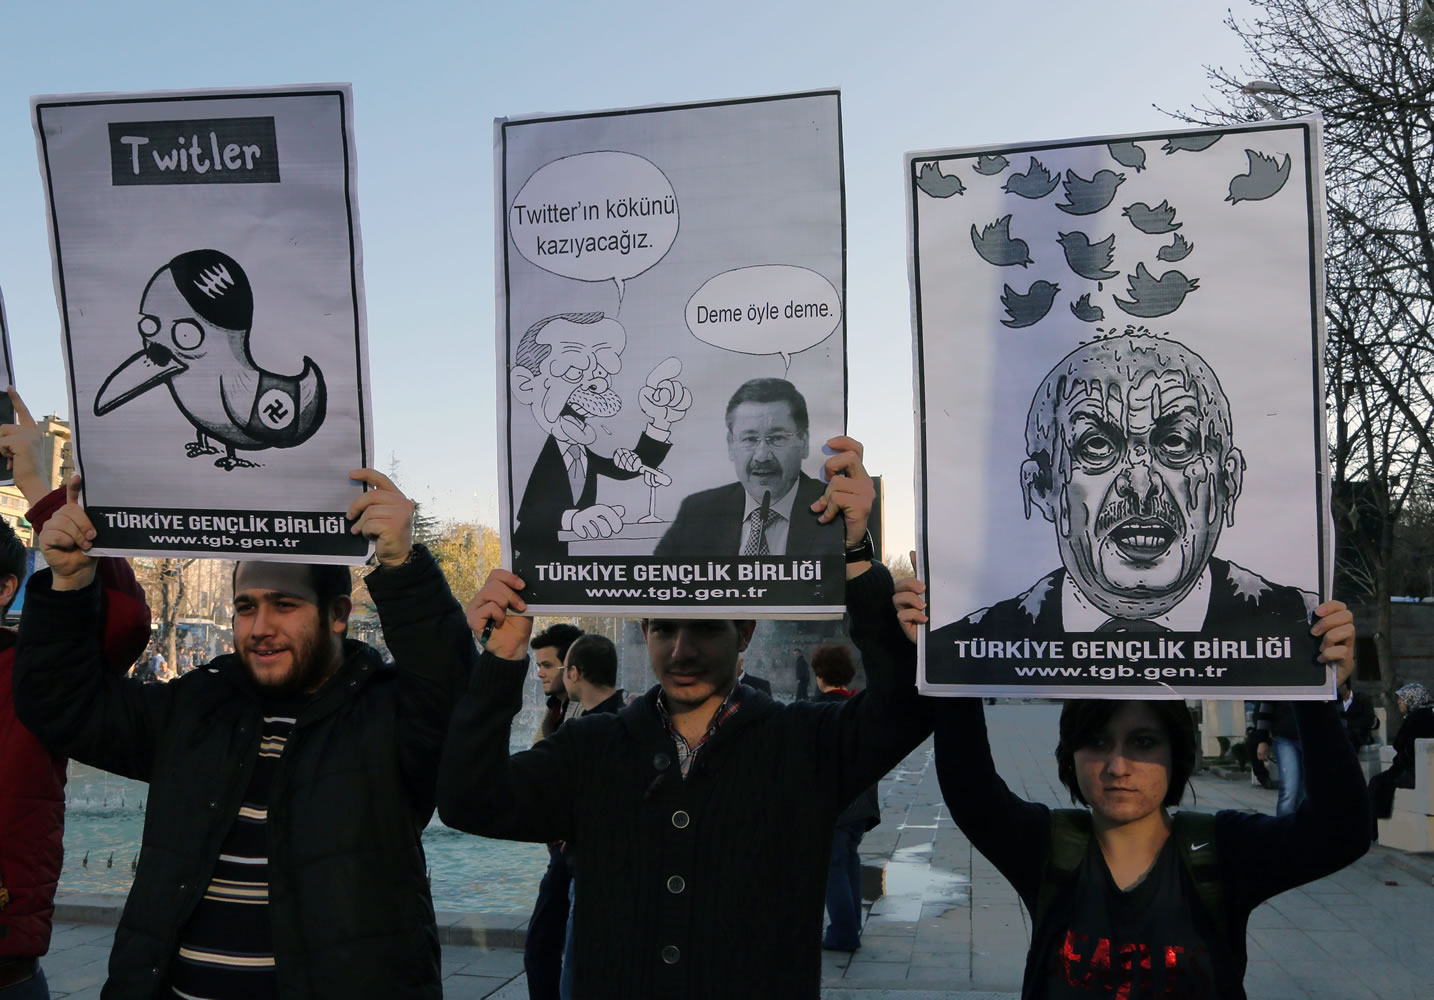 Members of the Turkish Youth Union hold cartoons depicting Turkey's Prime Minister Recep Tayyip Erdogan during a protest Friday against a ban on Twitter, in Ankara, Turkey. Turkey's attempt to block access to Twitter appeared to backfire on Friday with many tech-savvy users circumventing the ban and suspicions growing that the prime minister was using court orders to suppress corruption allegations against him and his government.